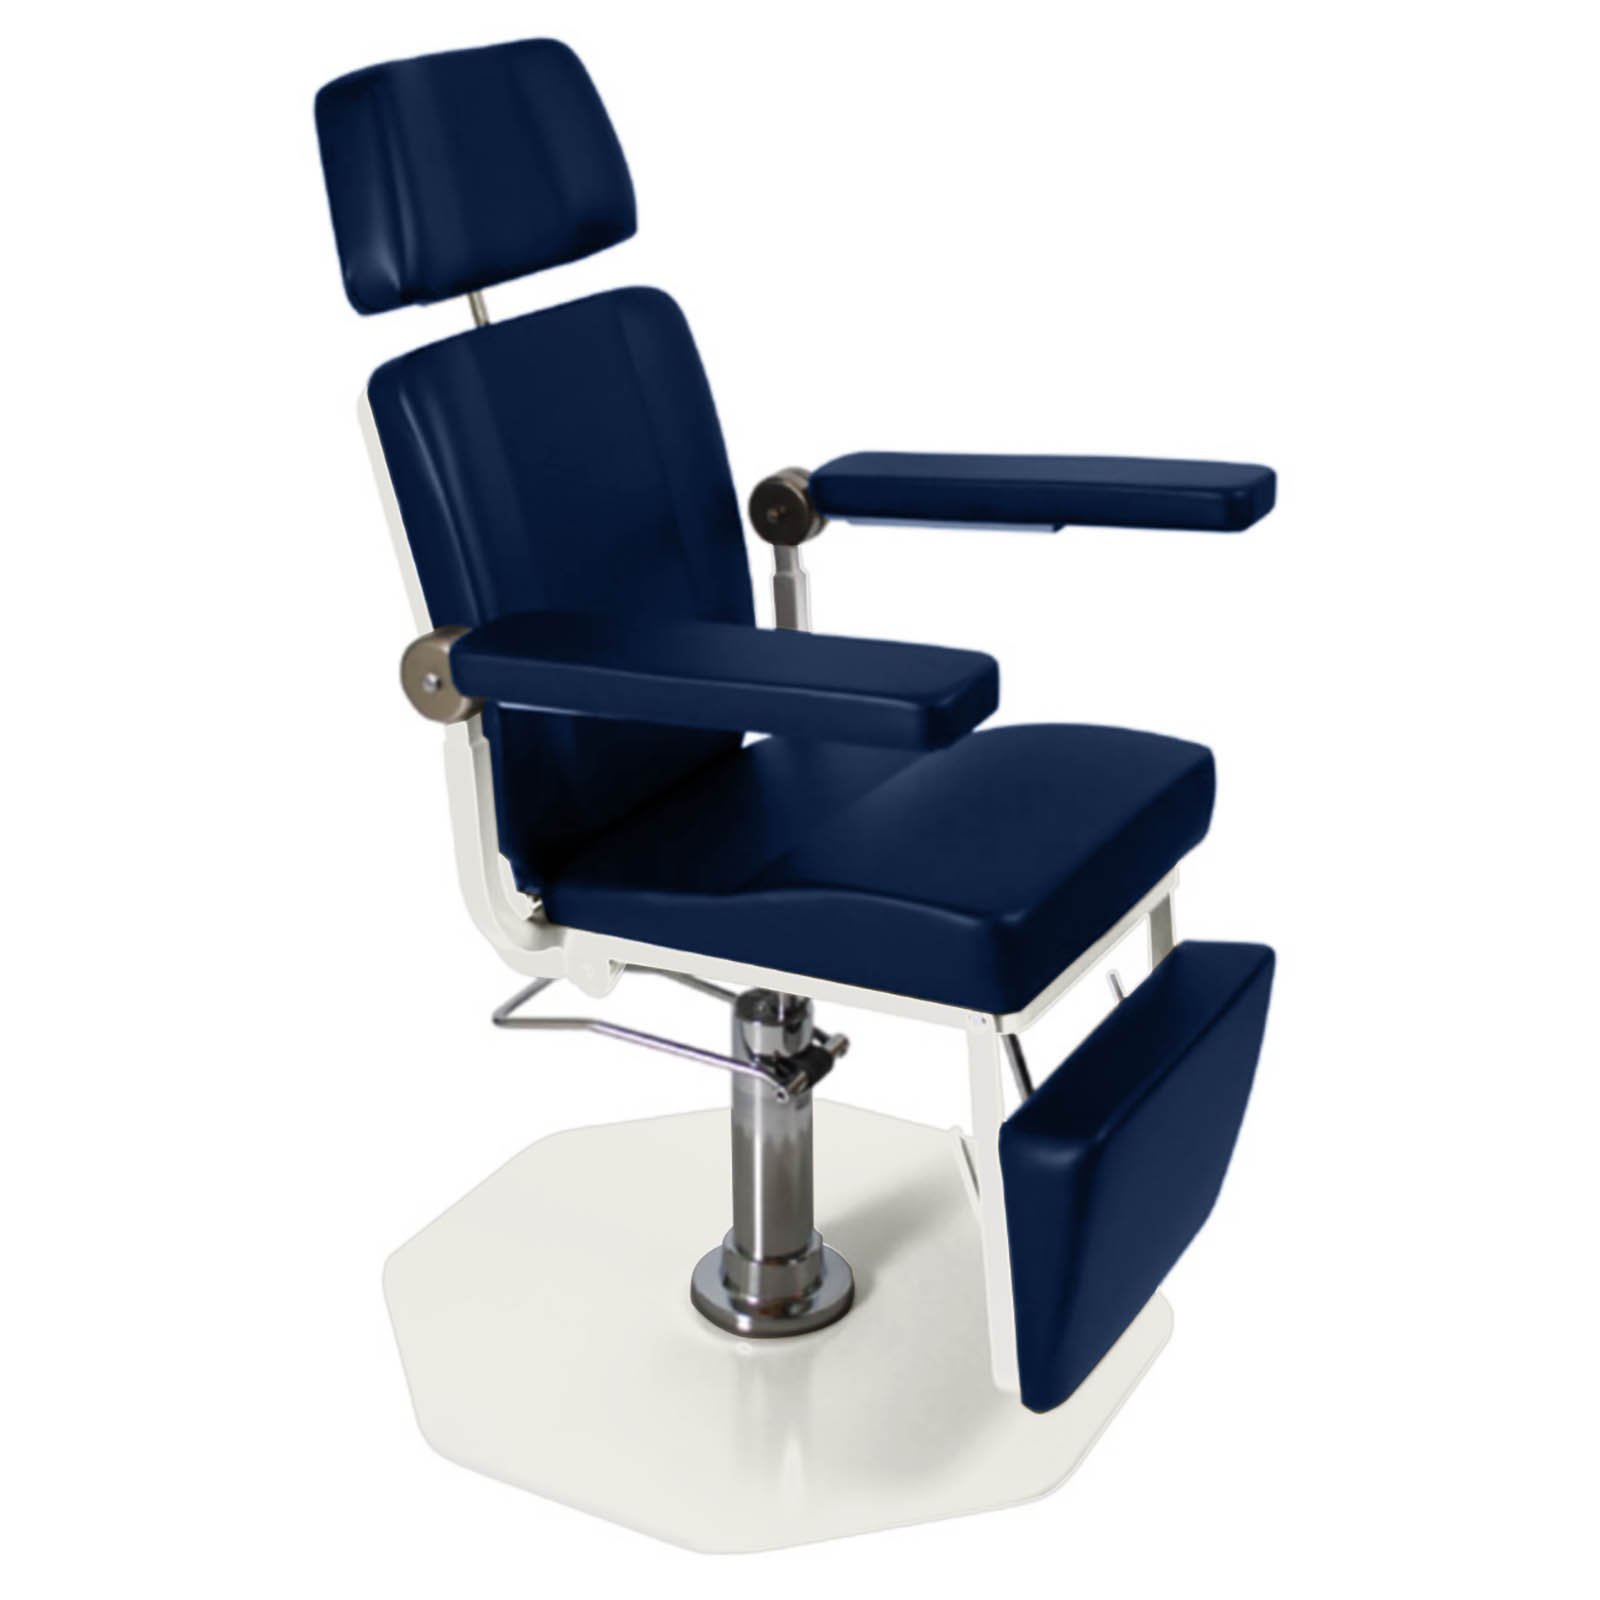 ENT Exam Chair UMF 8612